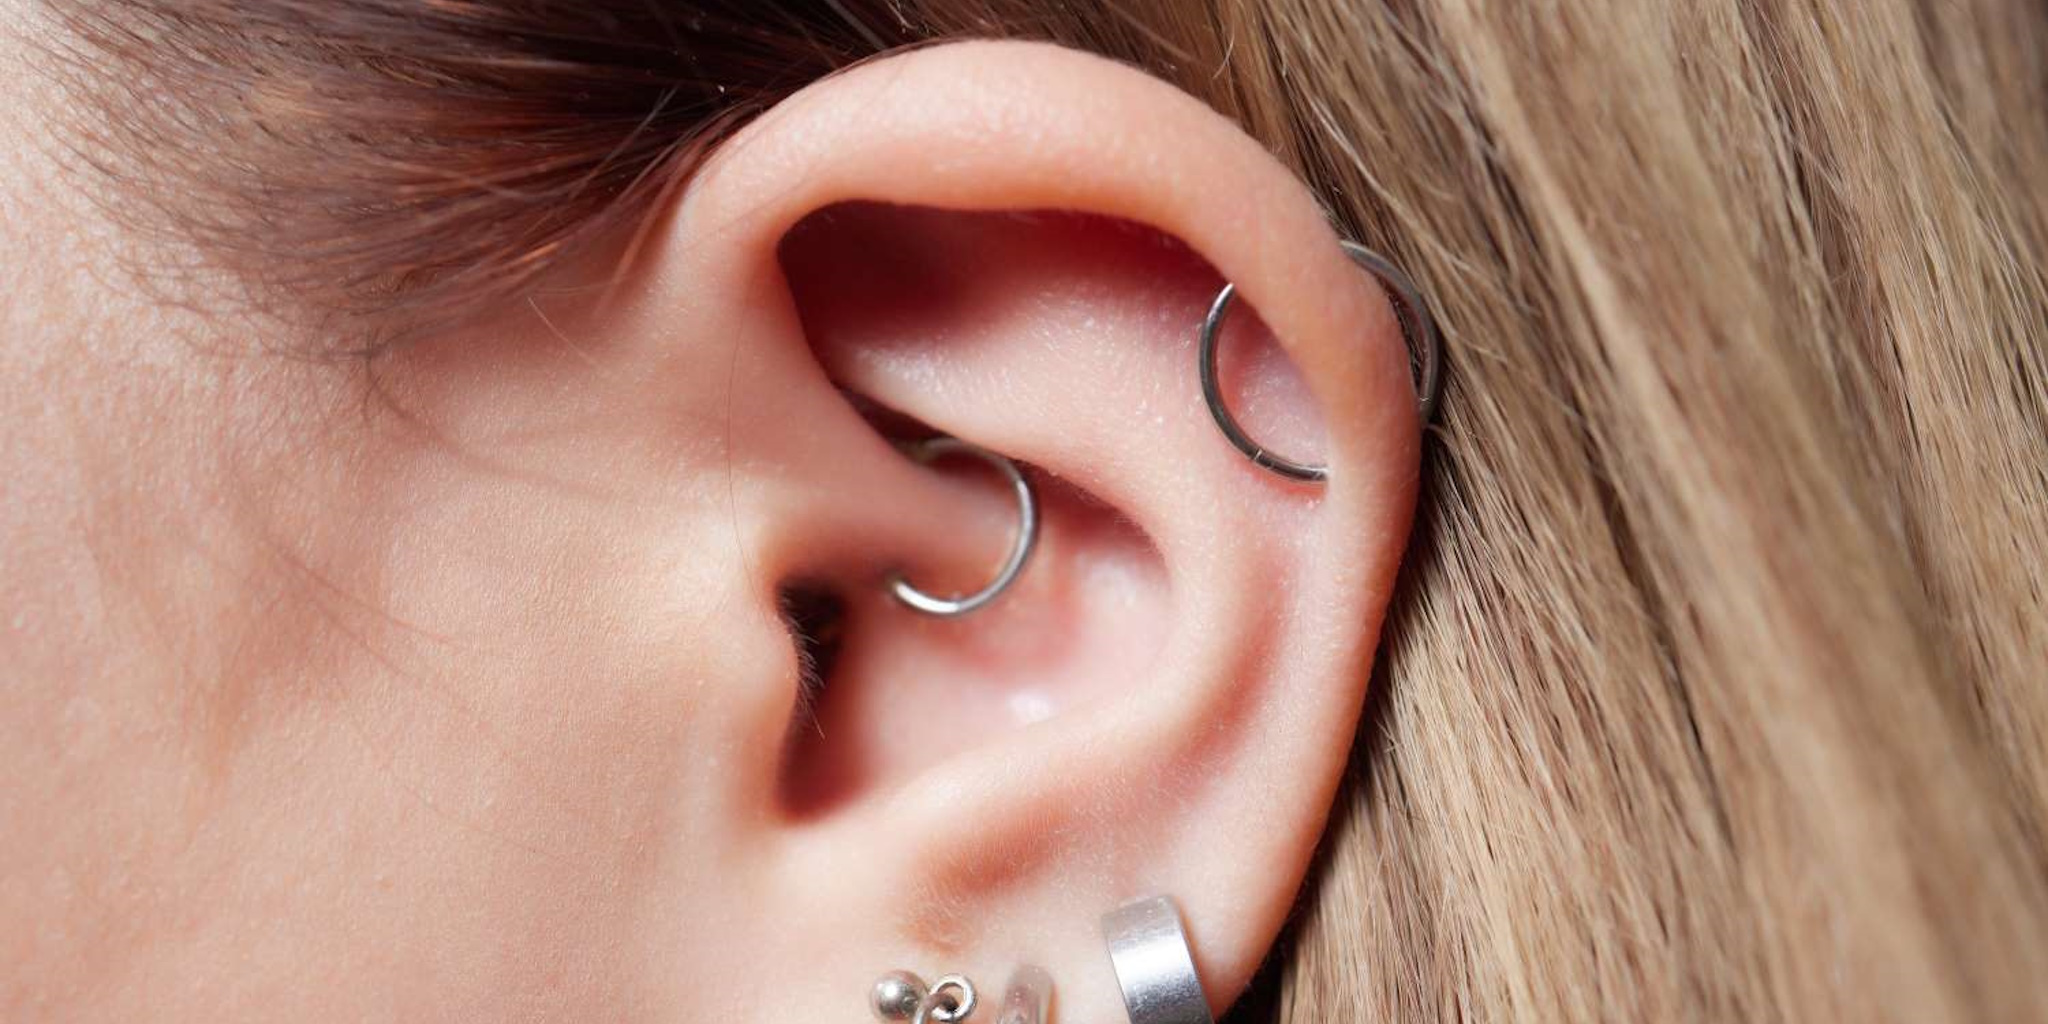 A female with long blond hair that has a daith piercing in her ear.